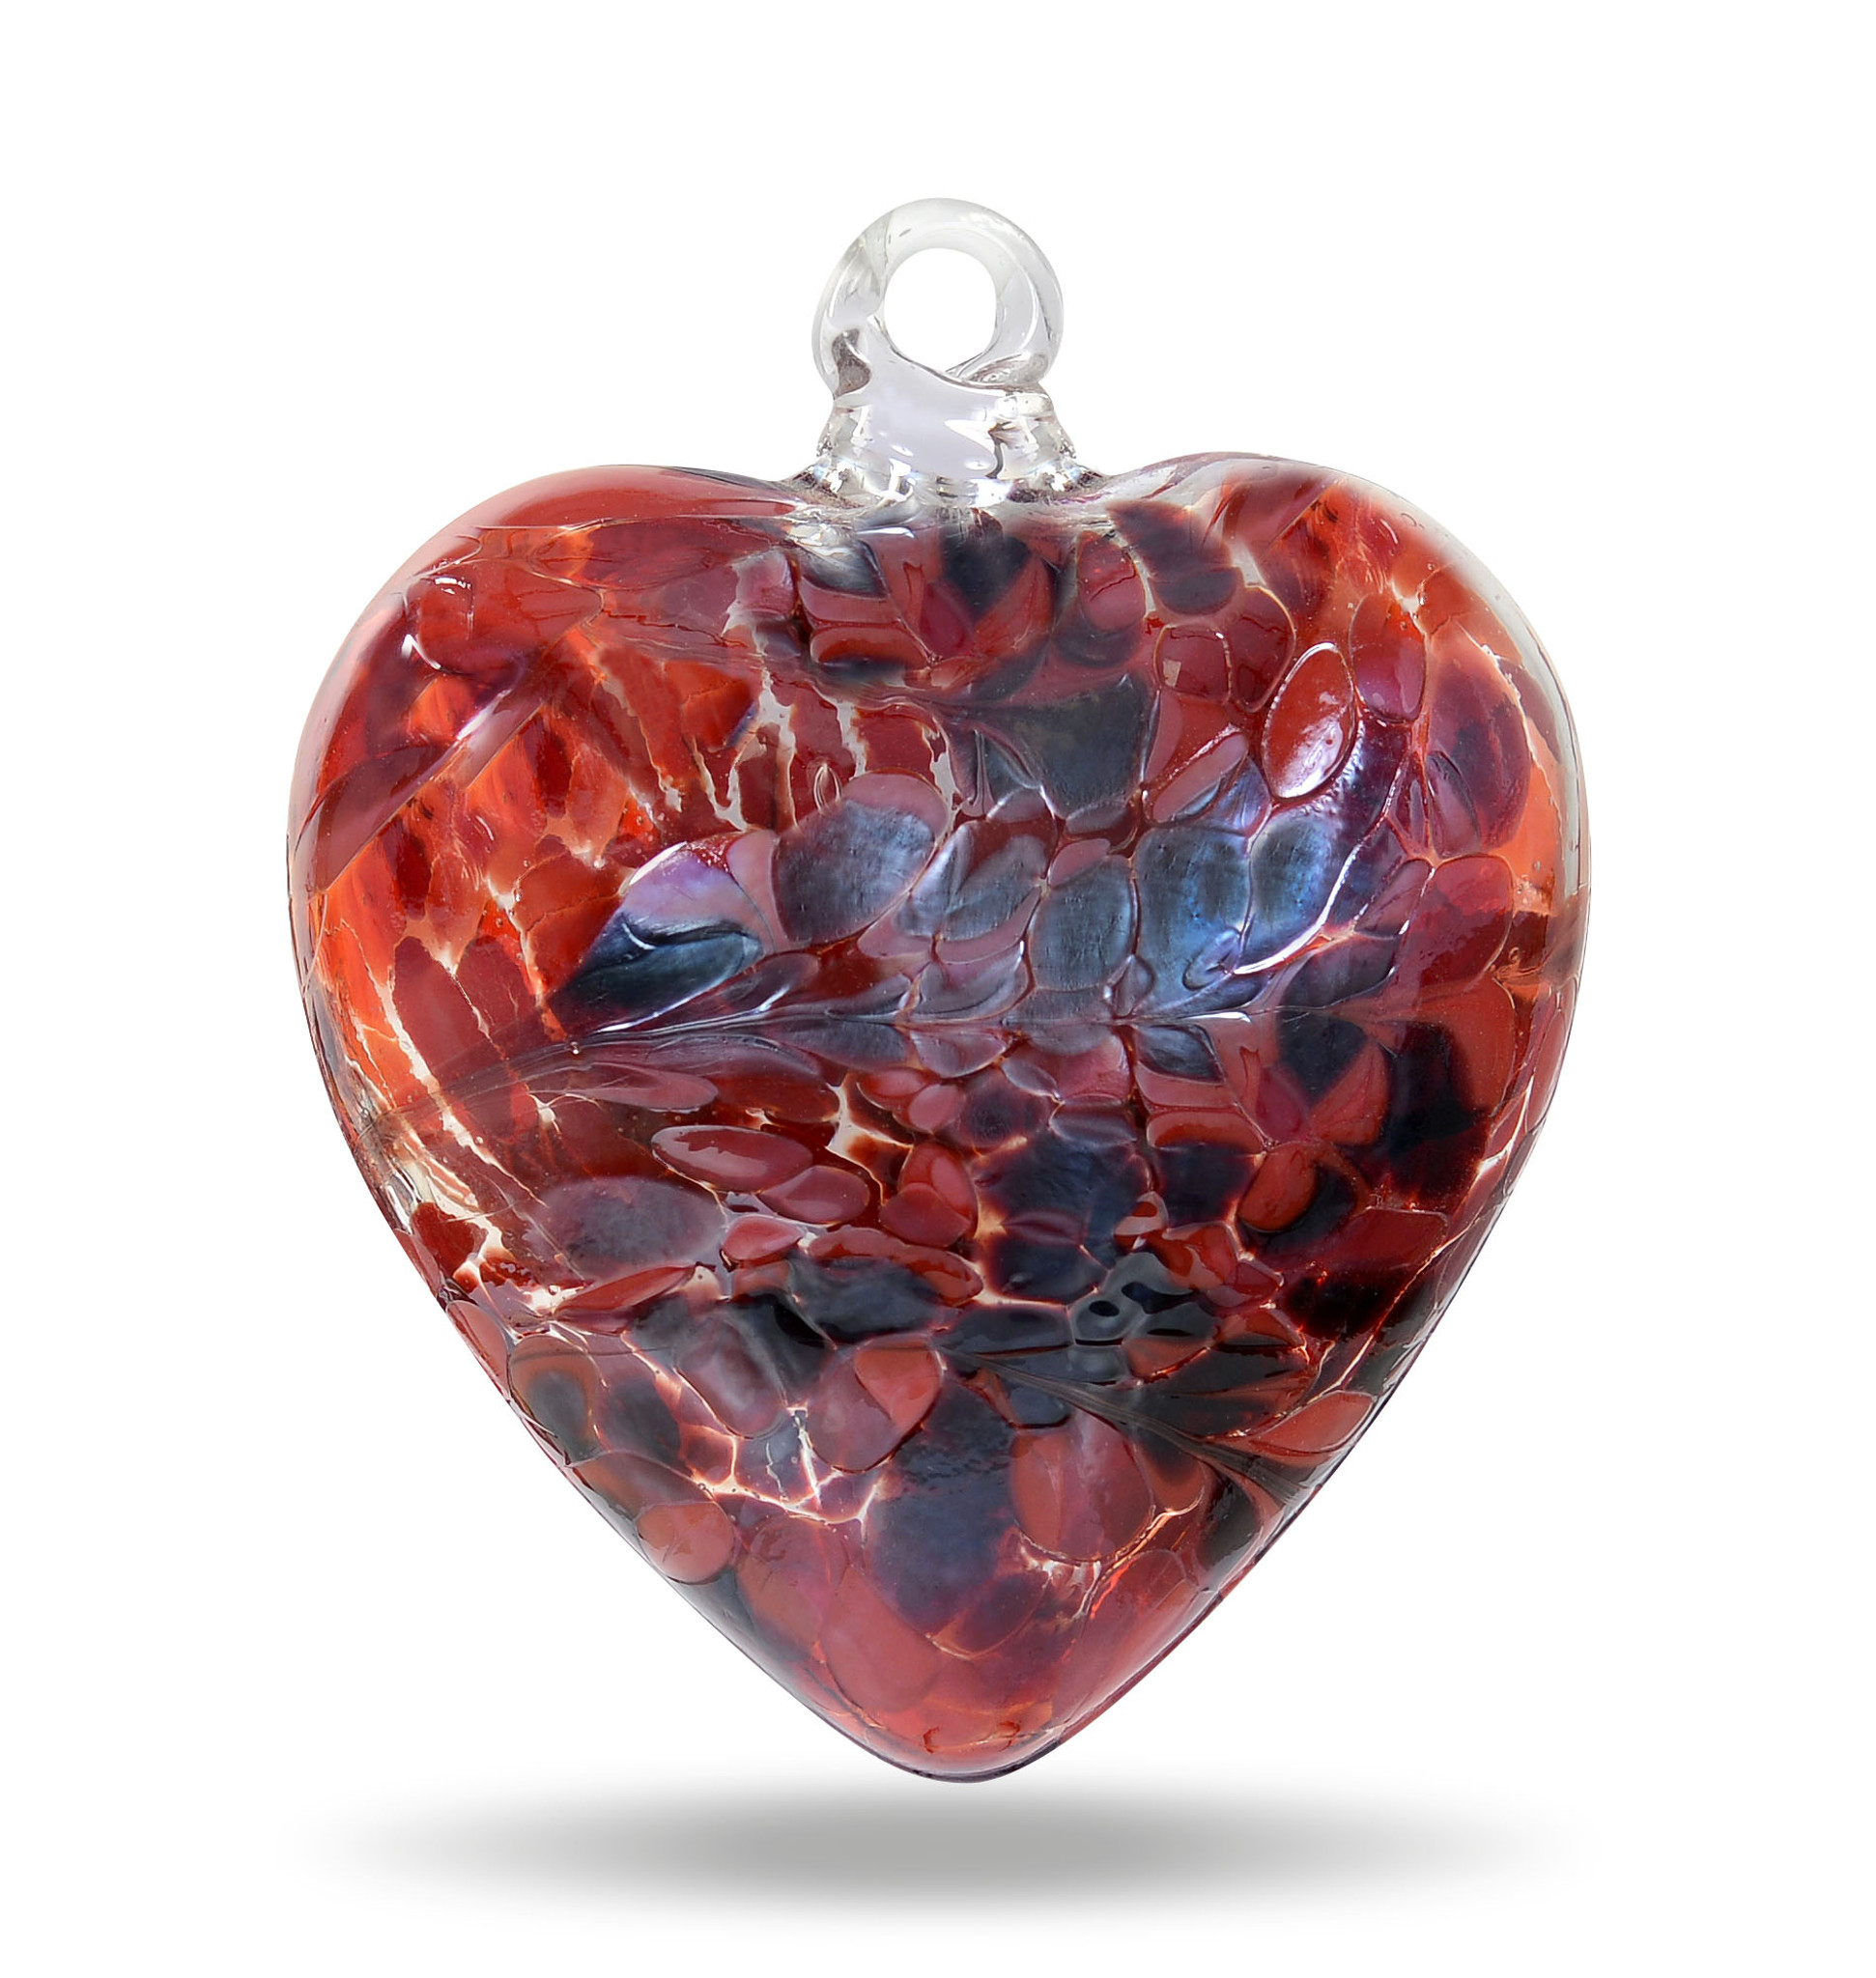 1 Small Red Glass Hearts - 1 DZ